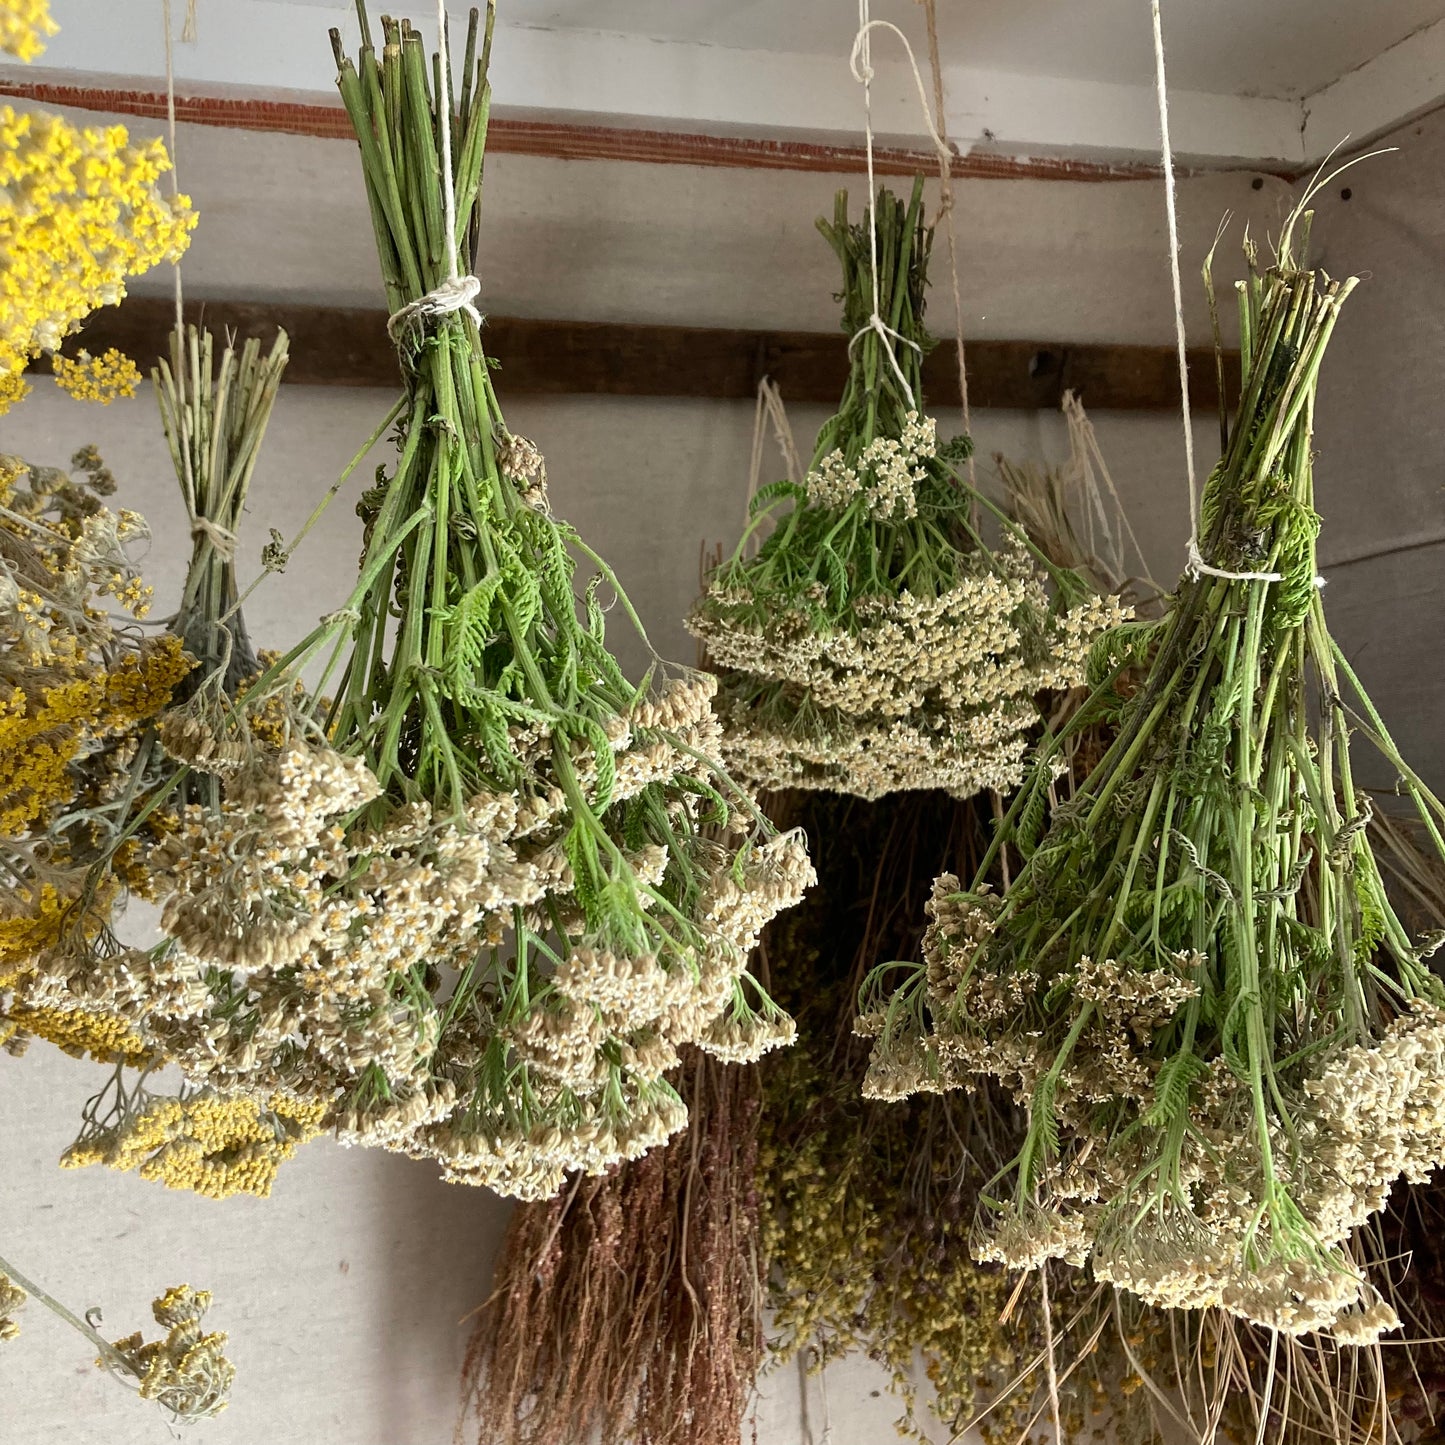 The Art of Drying Flowers | June 27th